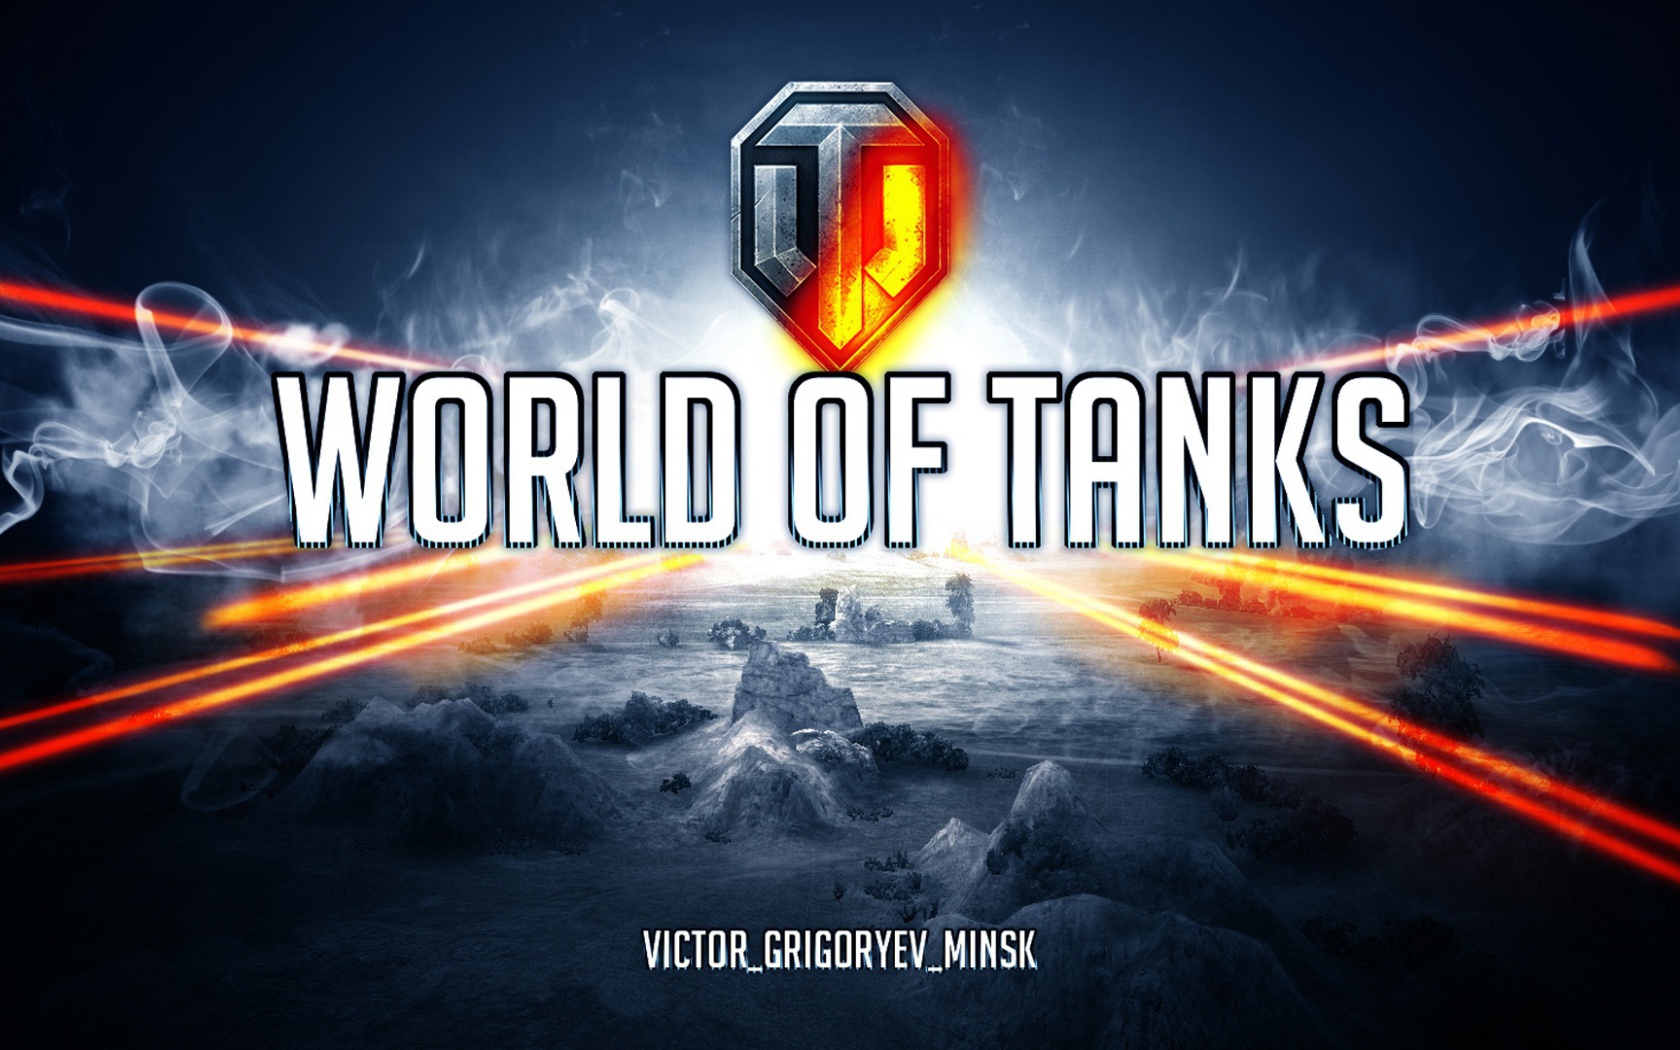 World of Tanks: take a look at the world of tanks